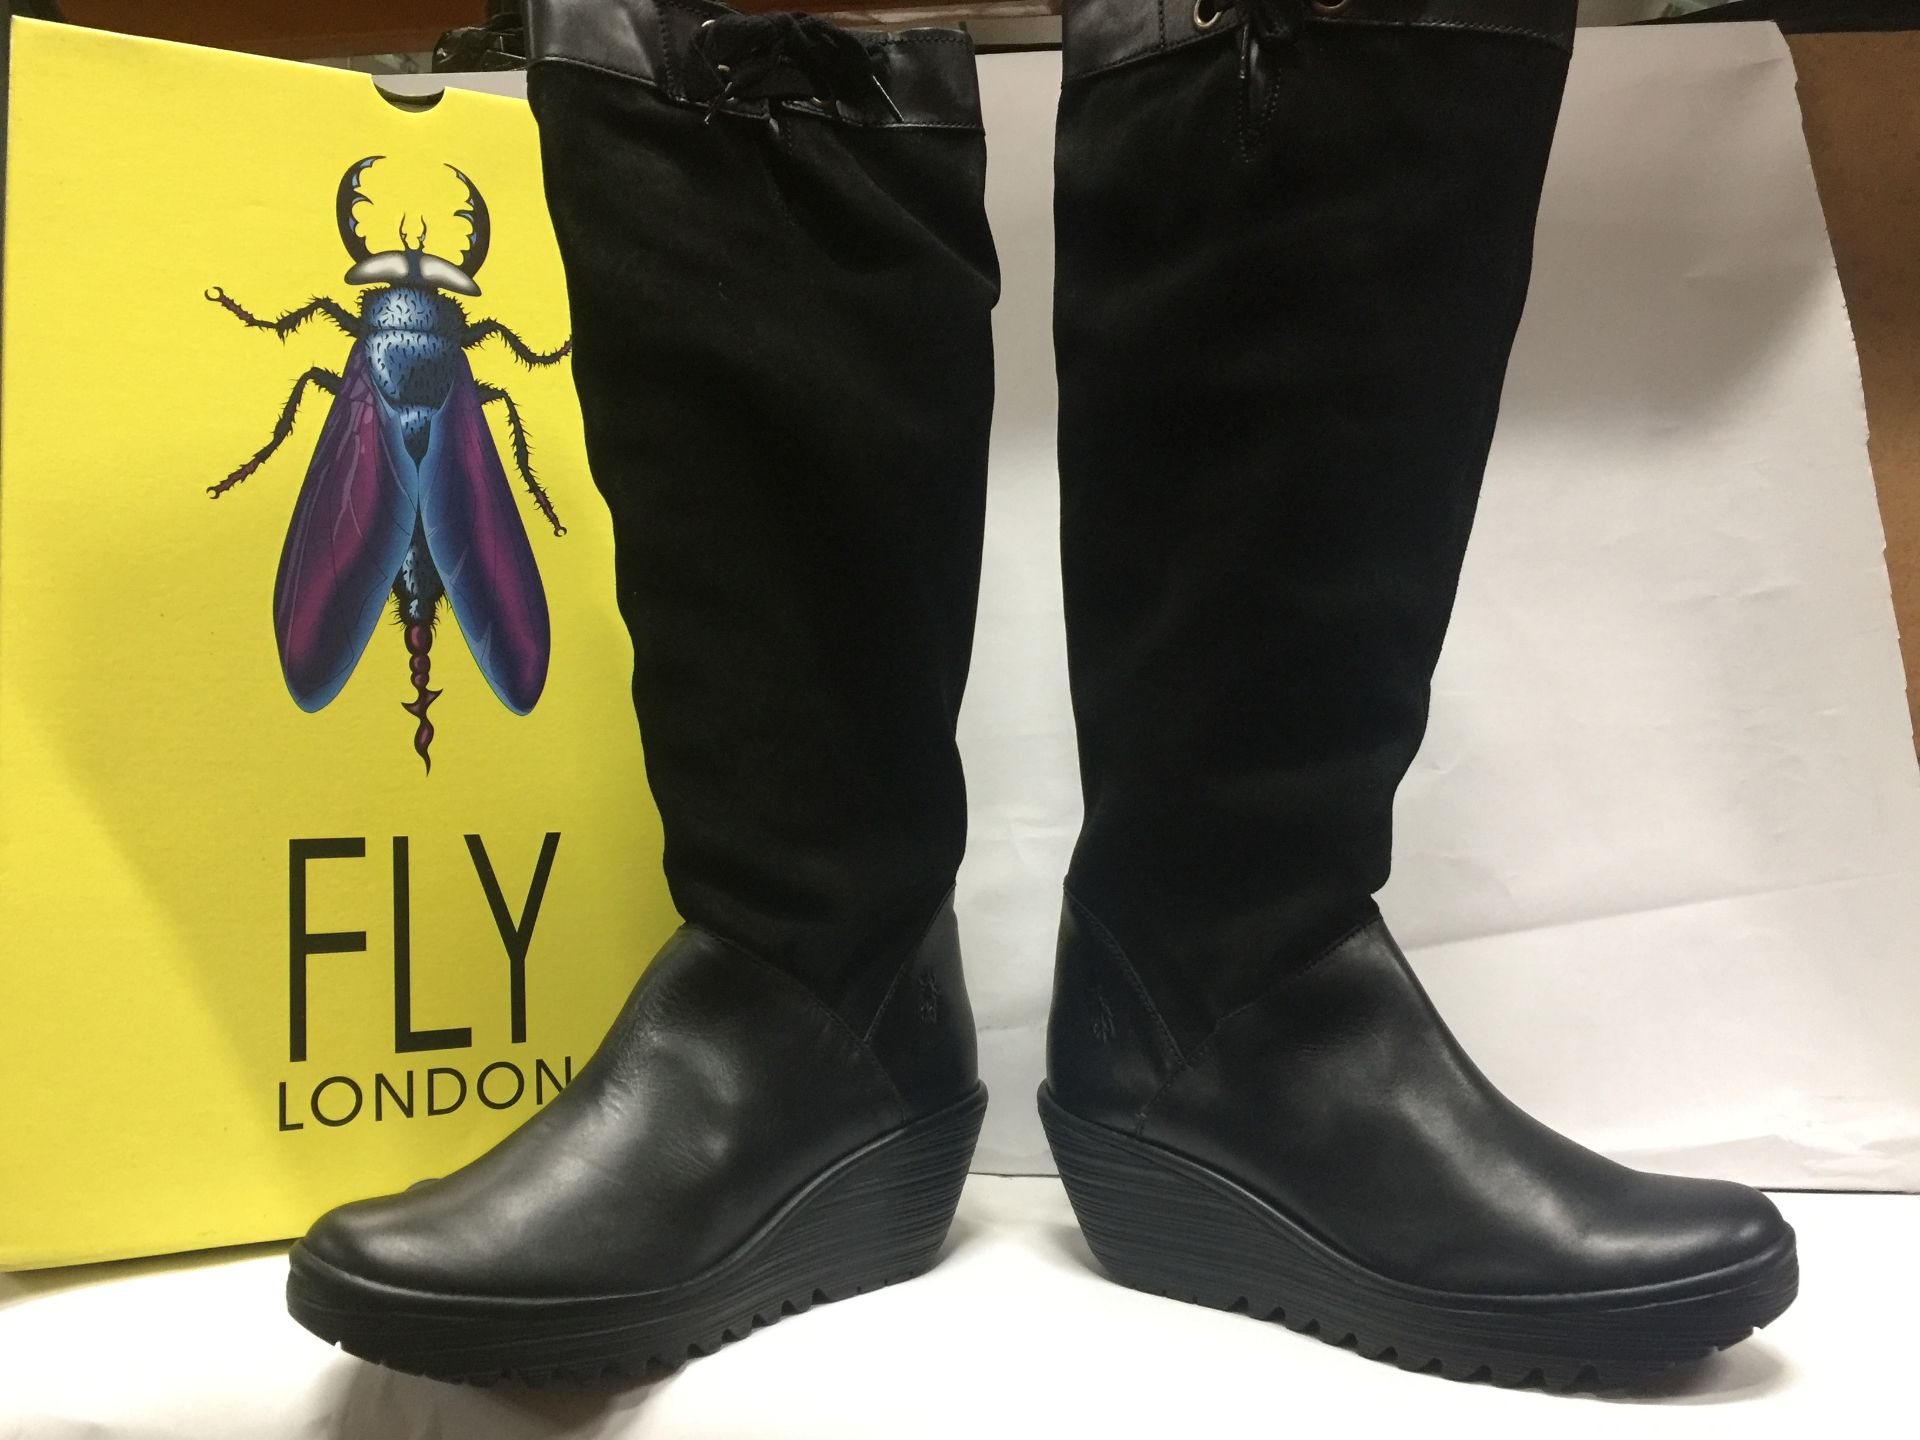 5 x Fly London Women's Boots Mixed Sizes, Styles and Colours Size Ranging EU 37 - EU 42 - Customer R - Image 2 of 4